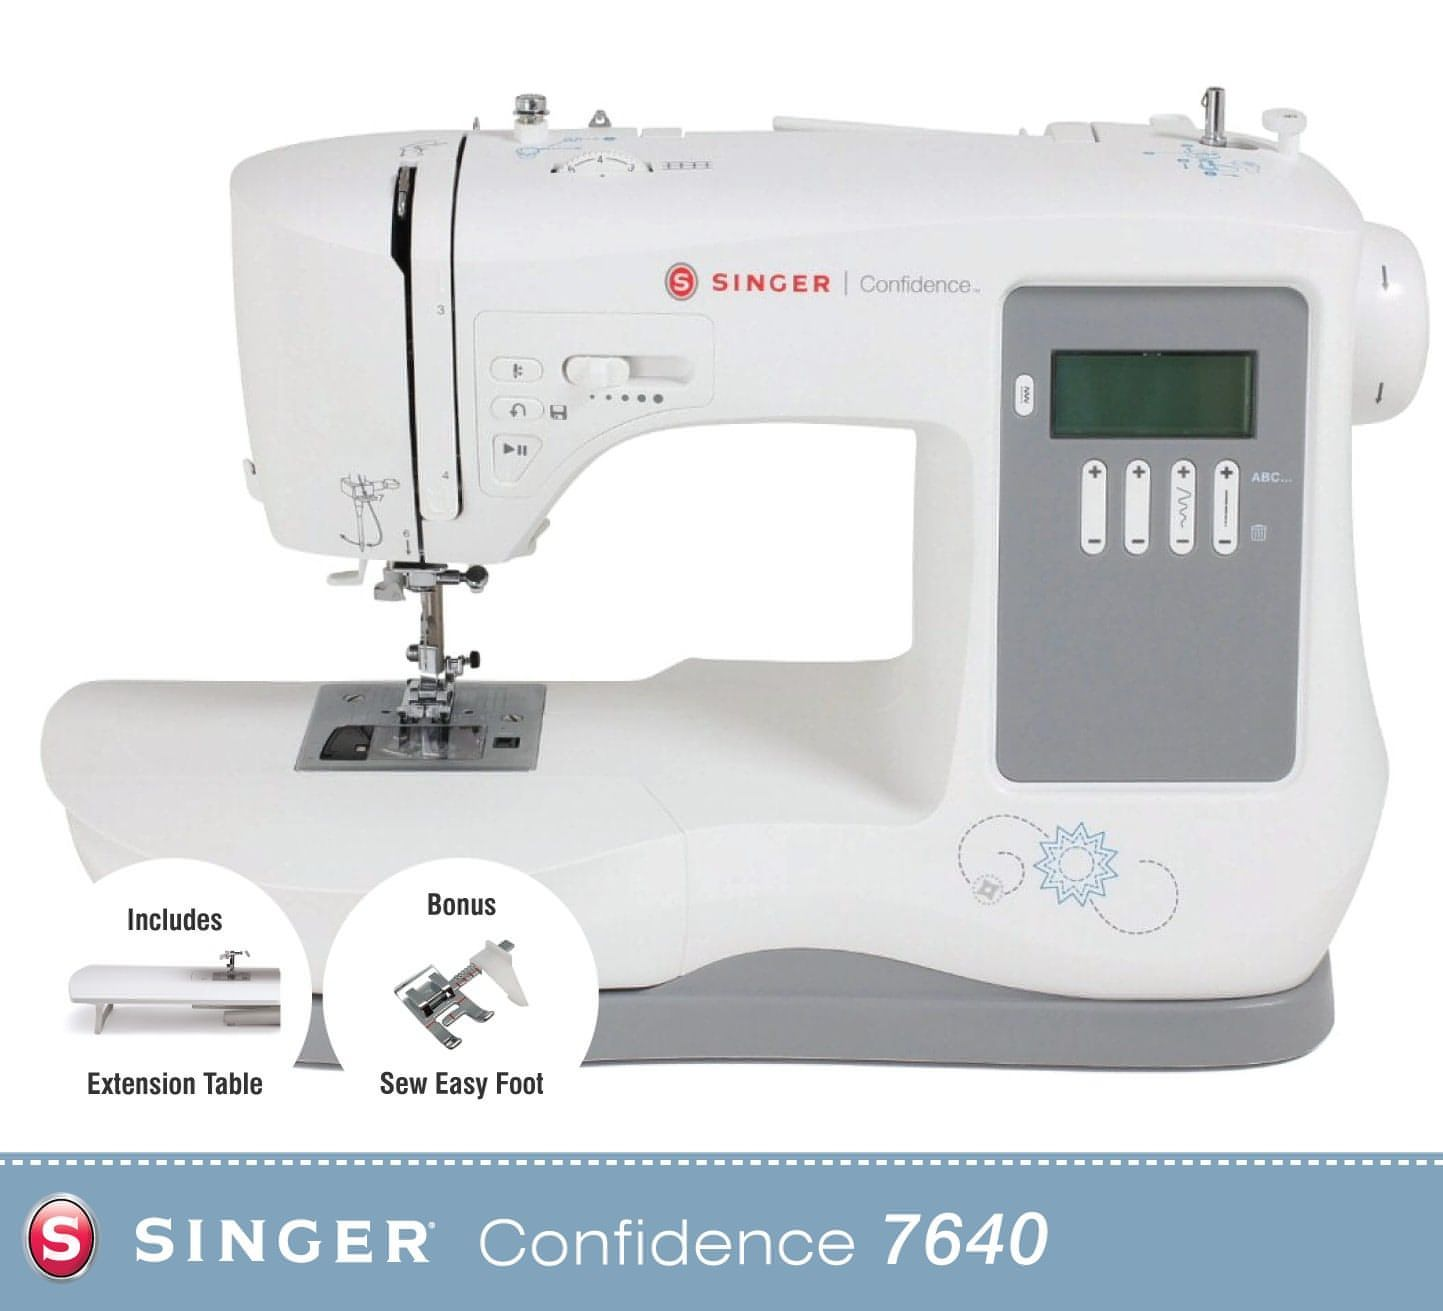 Singer Confidence 7640 Sewing Machine - 200 stitch patterns with extension table included